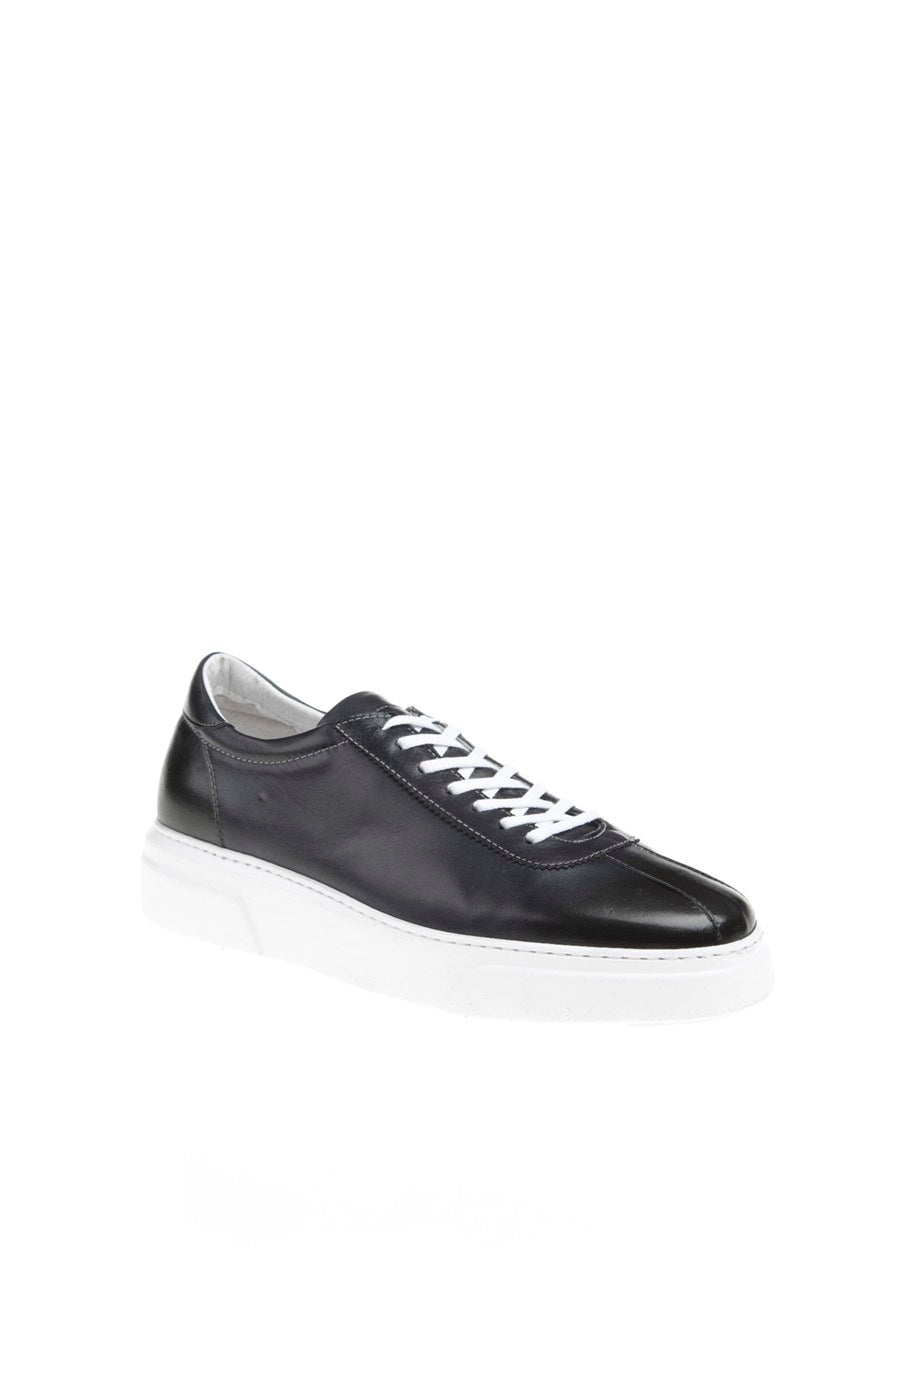 Genuine Leather Eva Sole Sports Shoes - MENSTYLEWITH